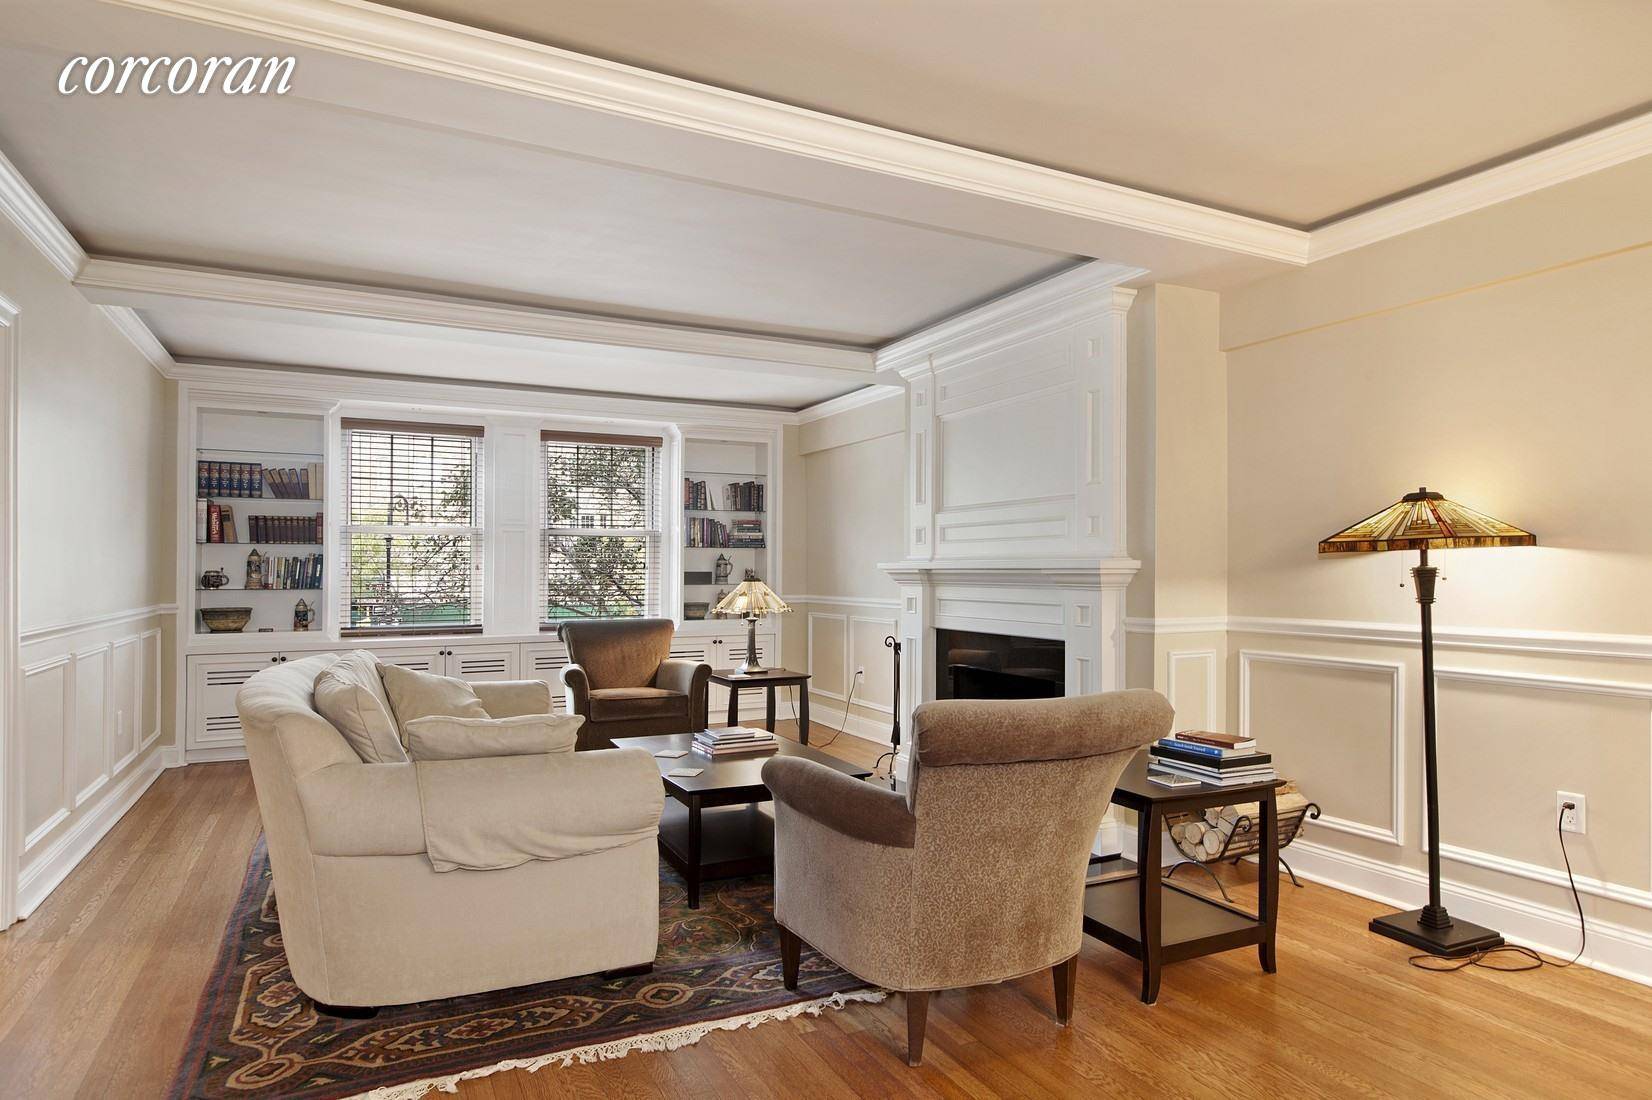 The building is justifiably renowned among West Village full service condos ; this unit is one of its jewels, with an enviable level of craftsmanship and attention to detail, including ...